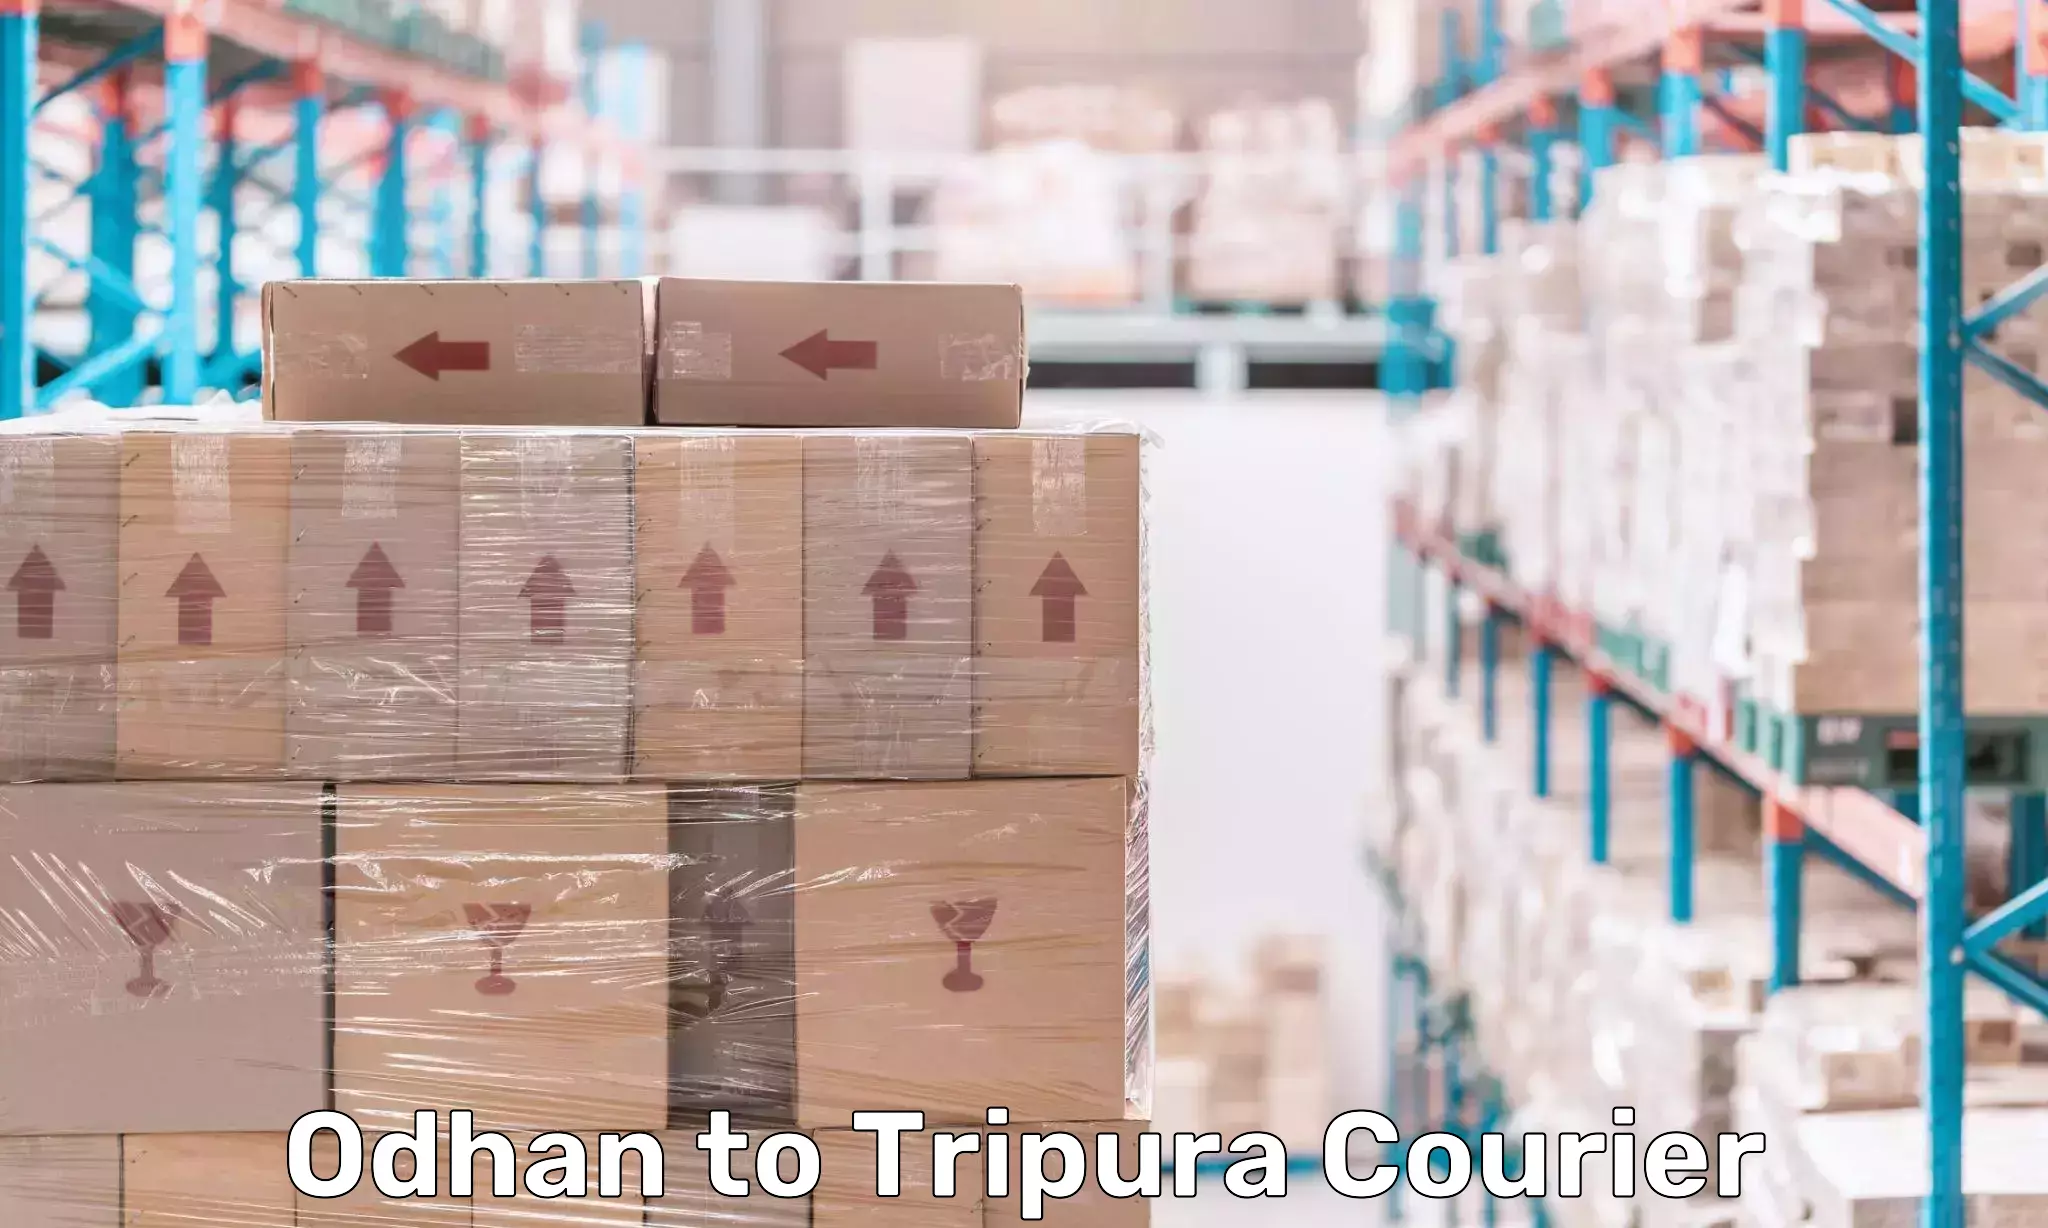 Air courier services Odhan to Udaipur Tripura